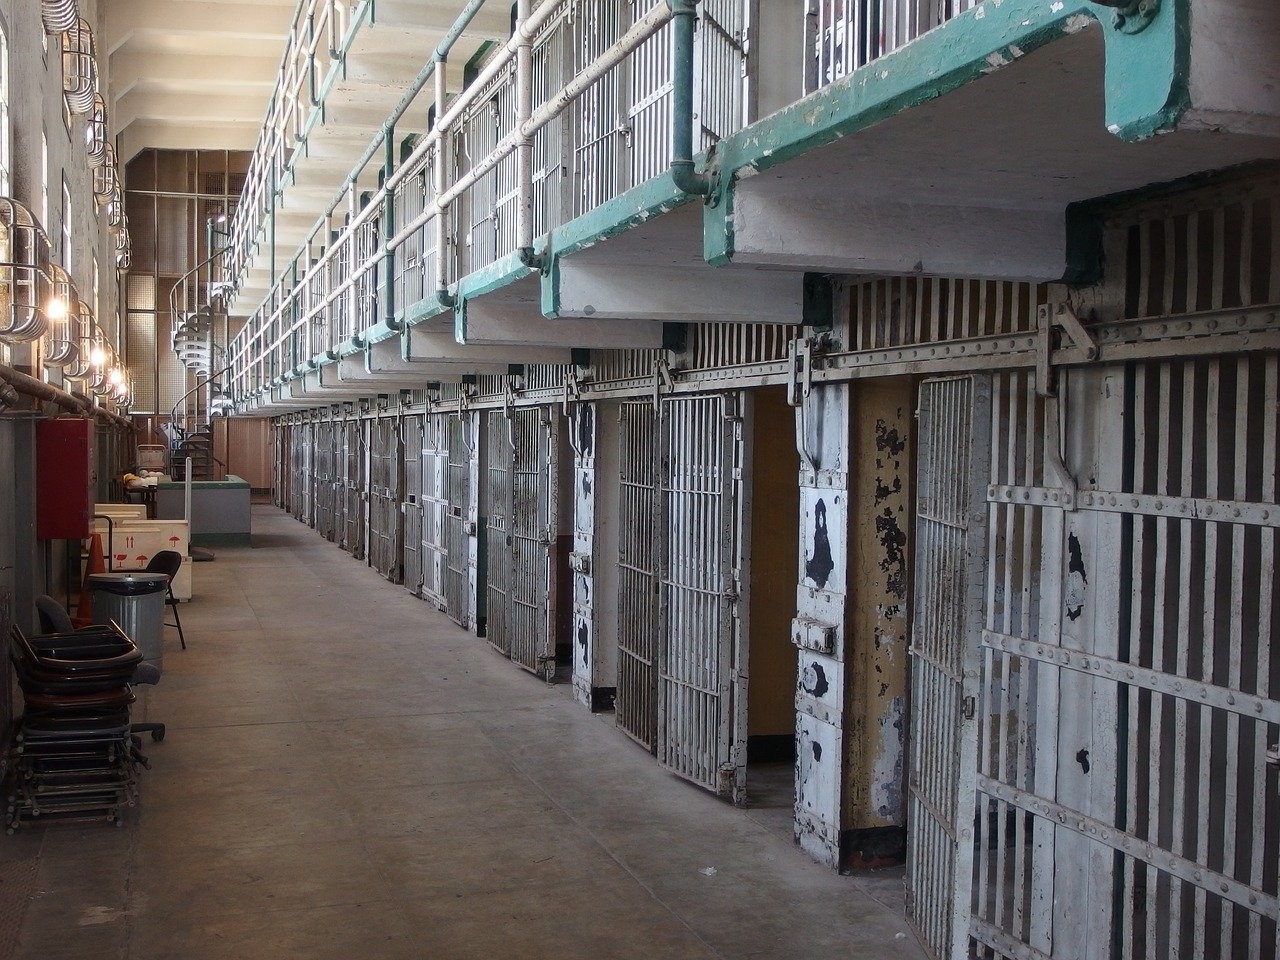 a photo of the inside of a prison